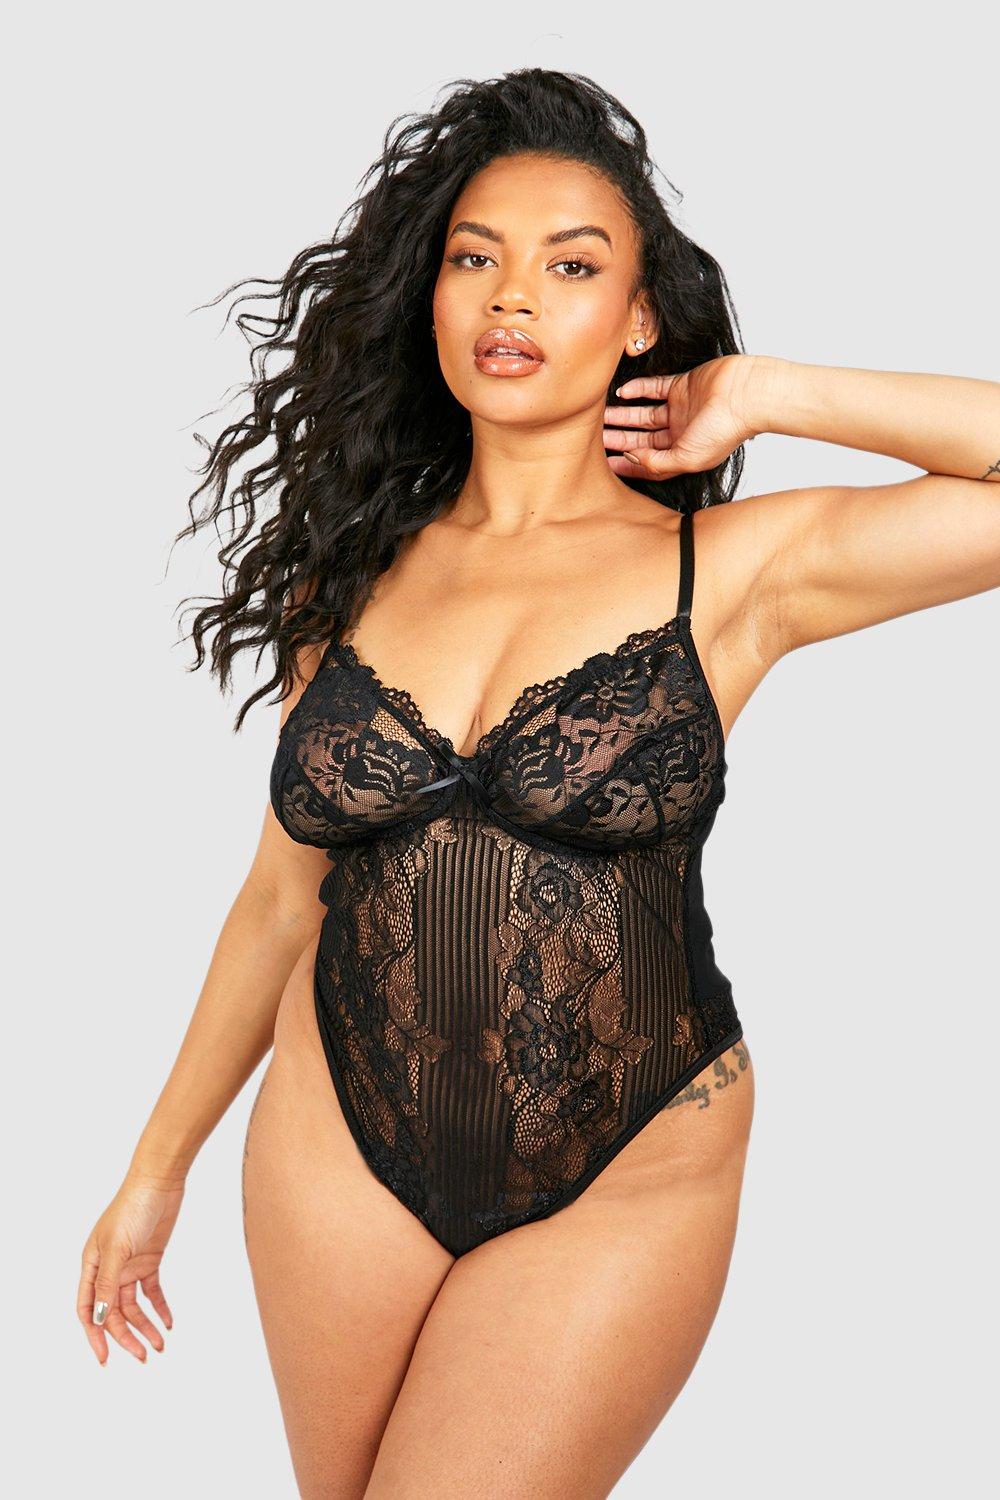 Be Bold Lingerie - Available in S/M/L/XL #lingerie #sexy #fashion